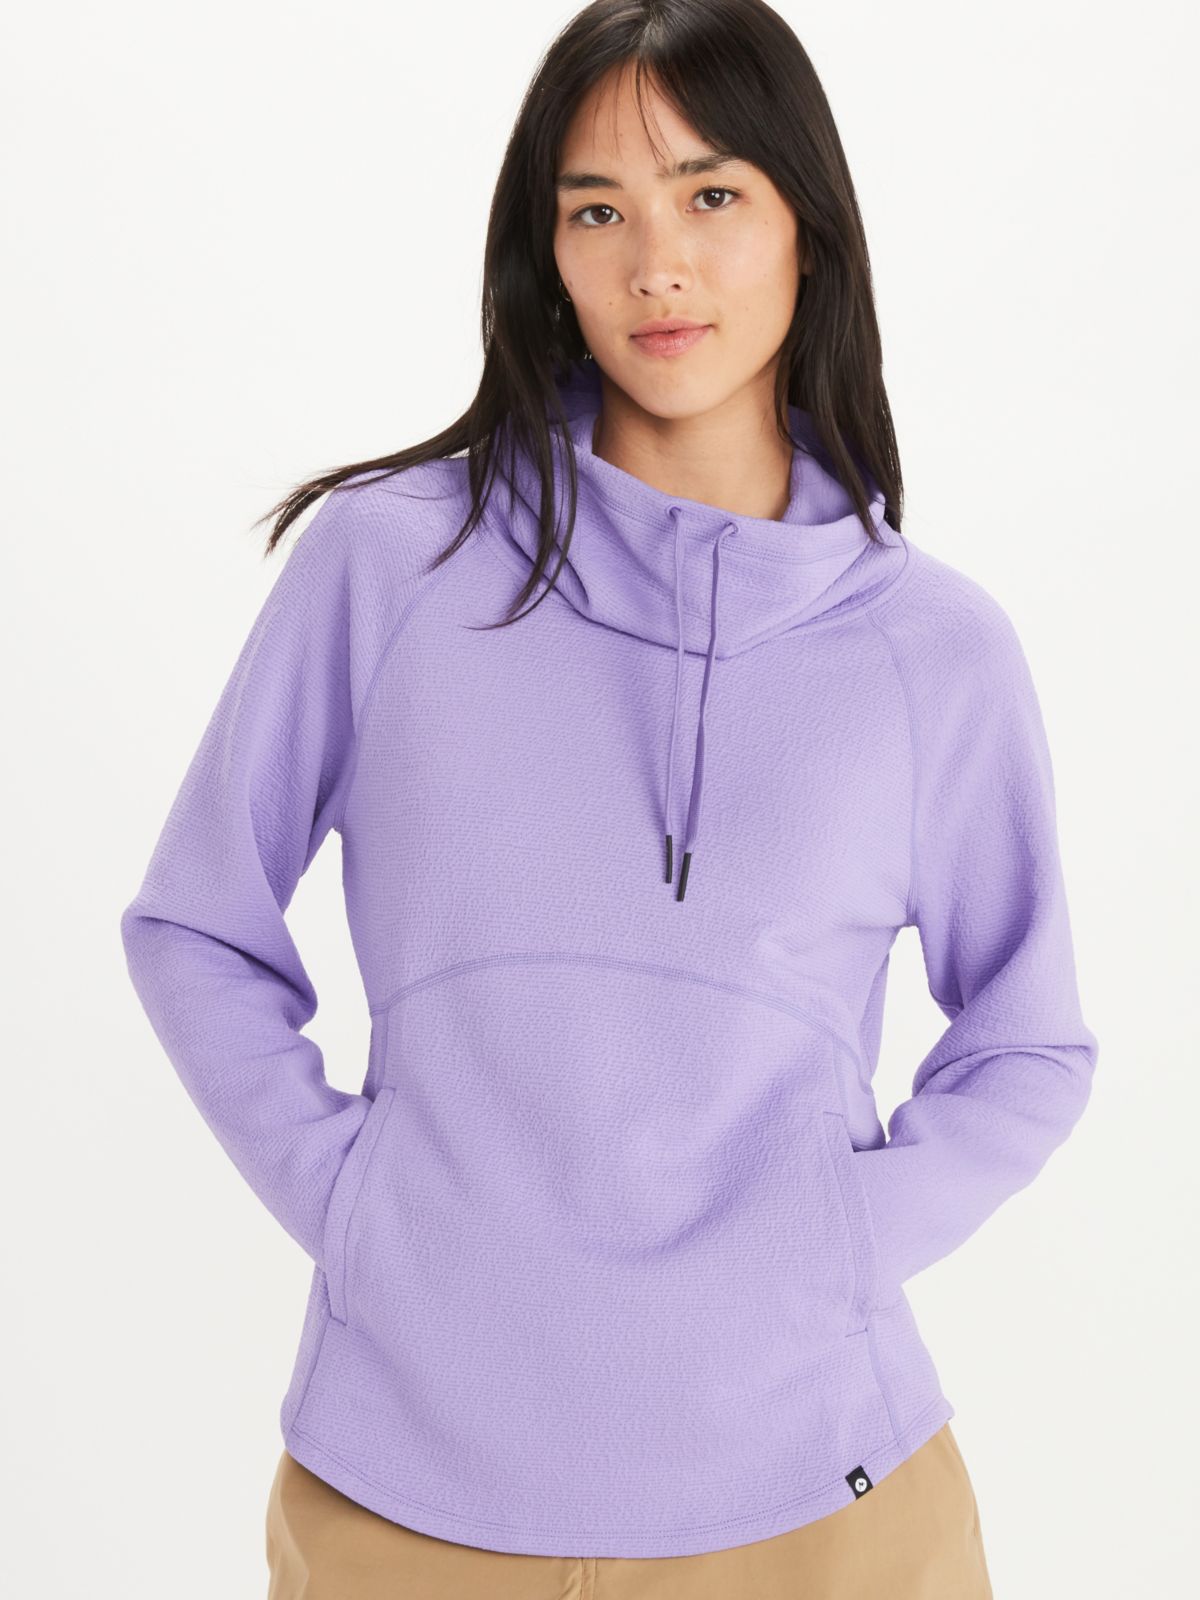 women's pullover hoodie on woman